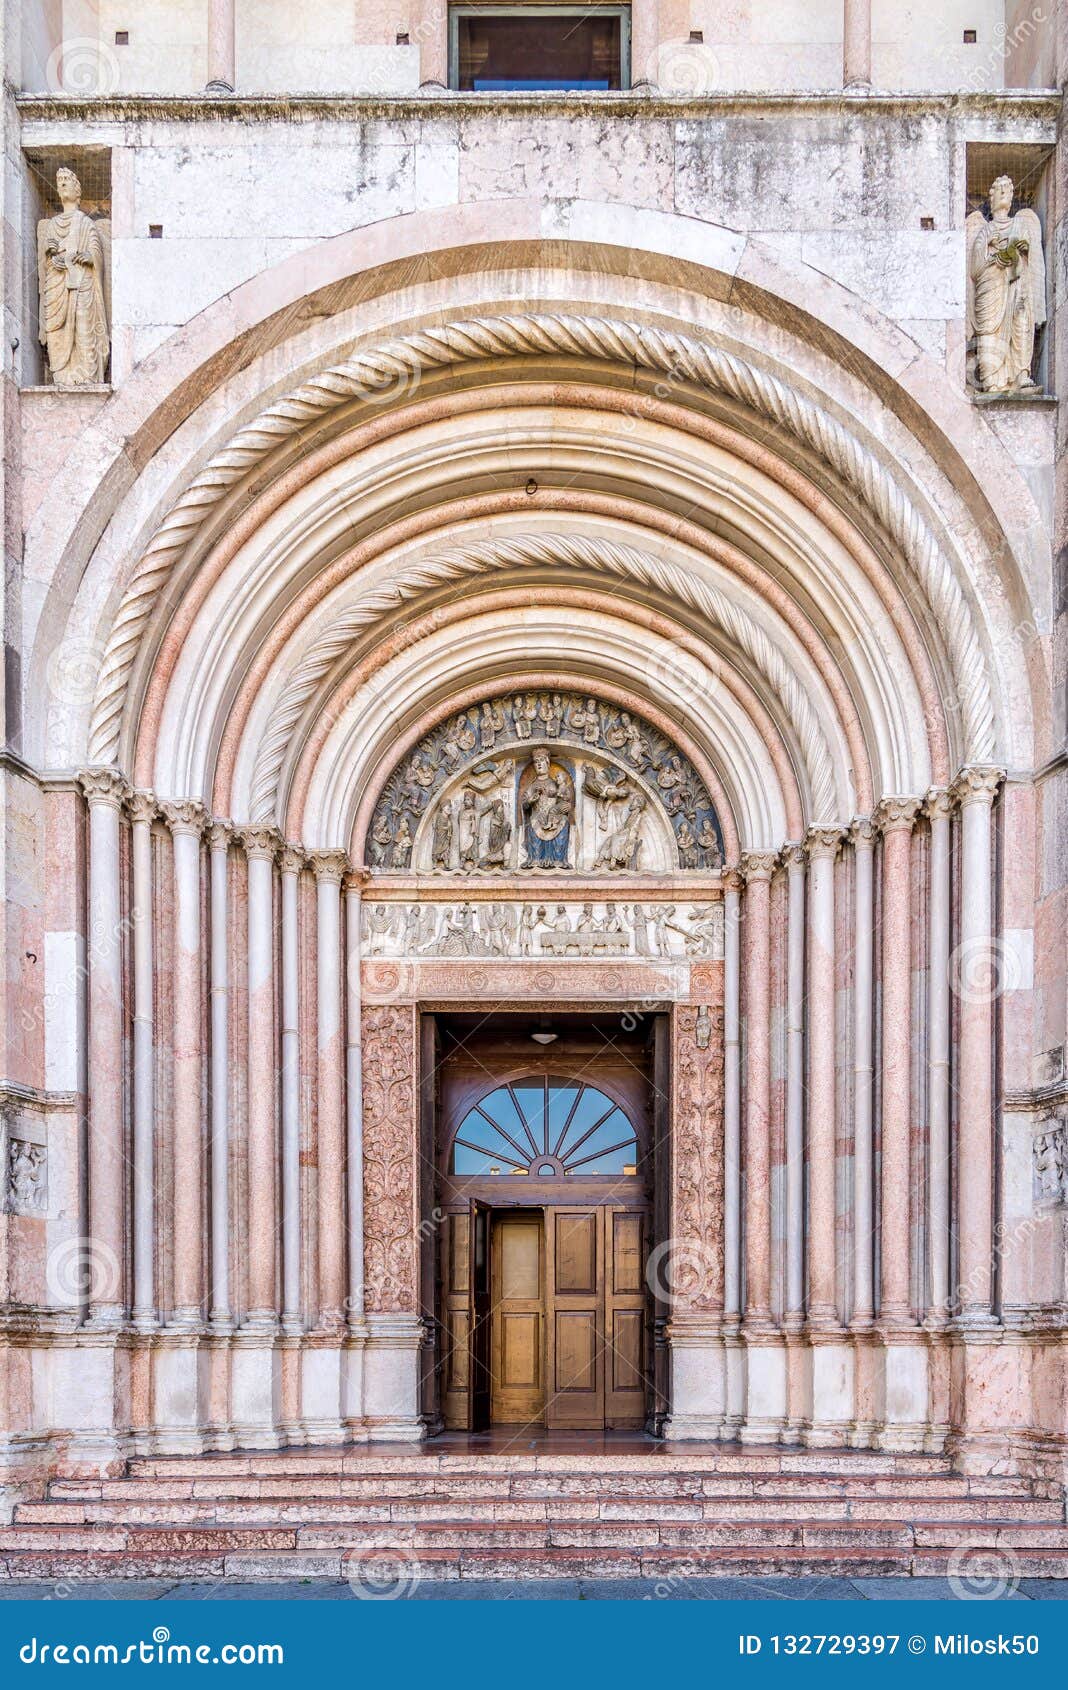 View At The Entrance To Baptistery Of Parma In Italy Stock Image